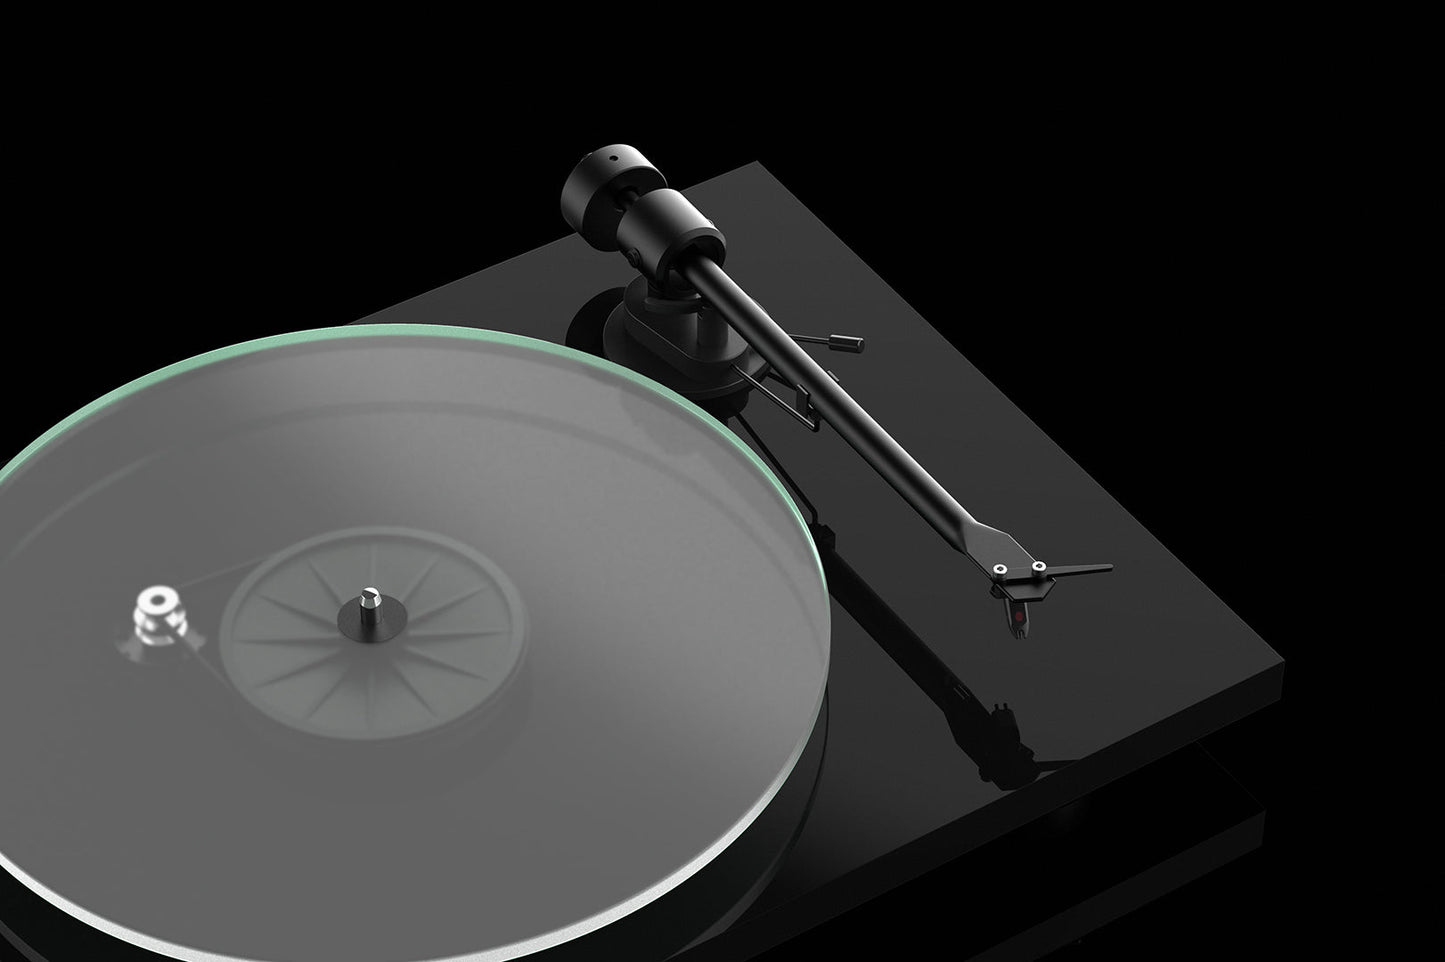 Pro-Ject T1 - Store Demo